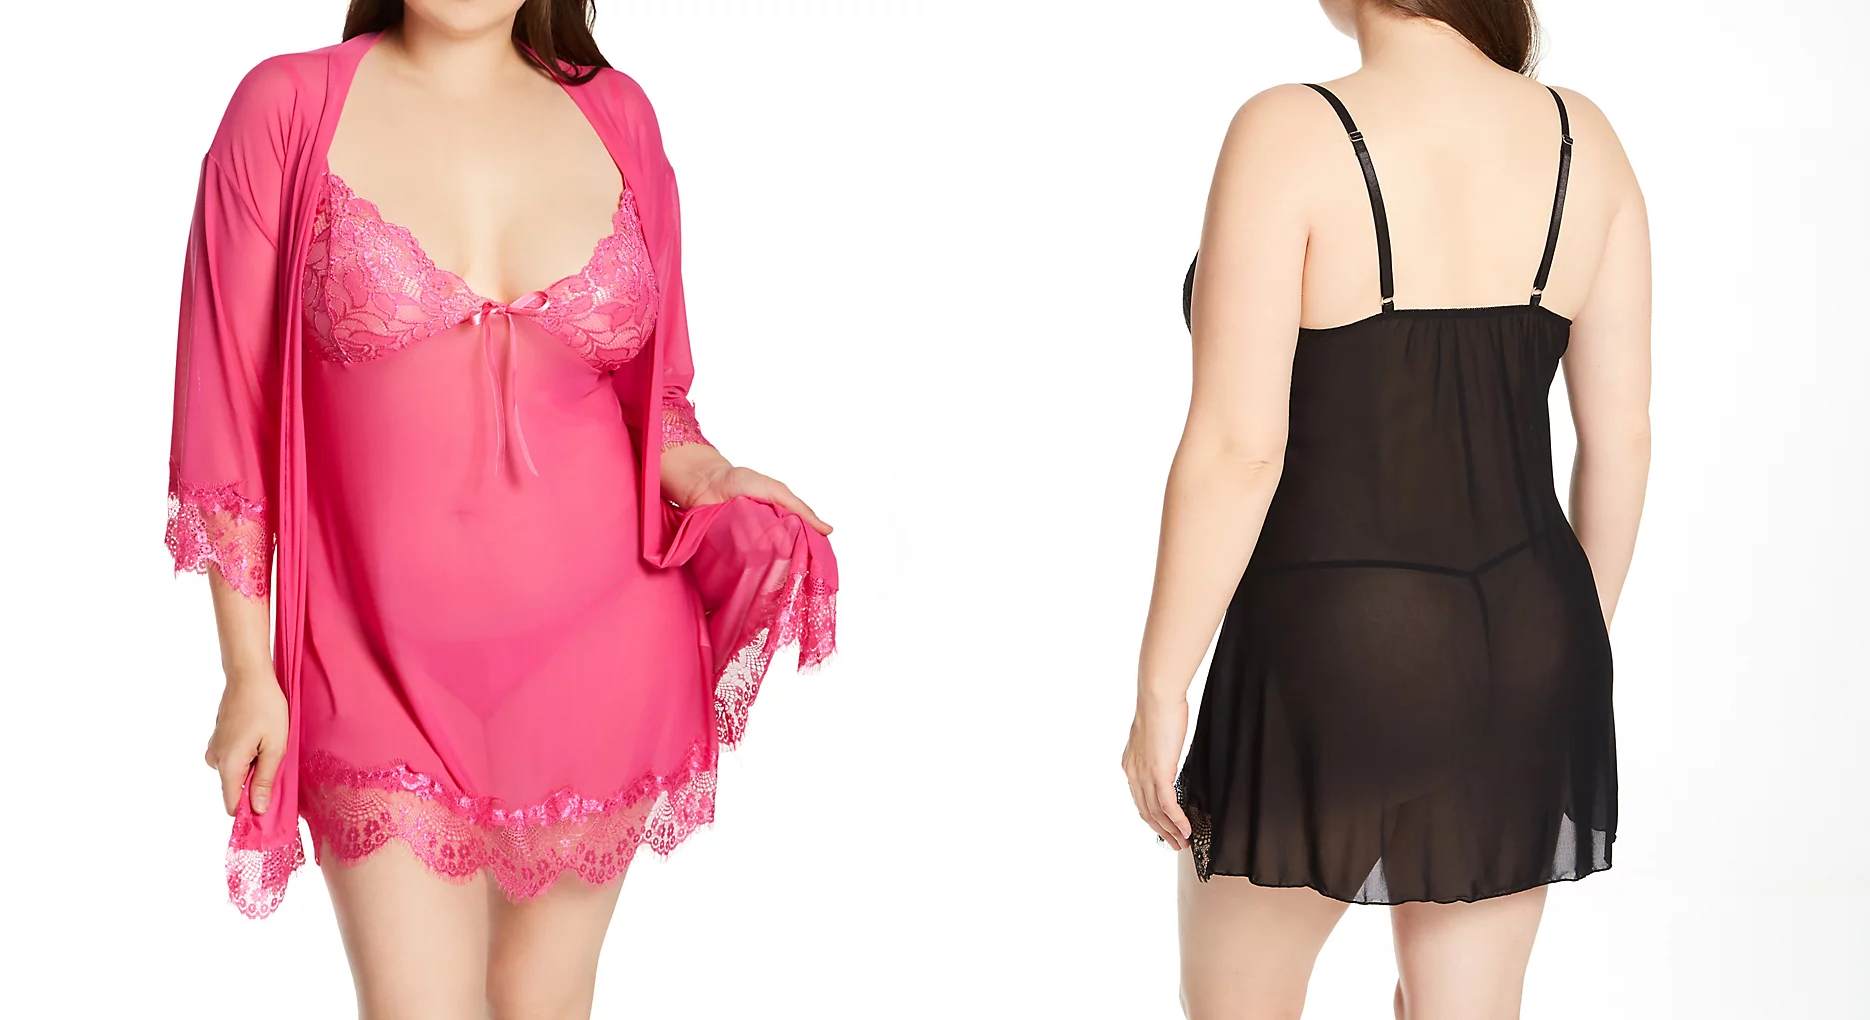 Baby doll lingerie with matching panties are a great Valentines Day gift.